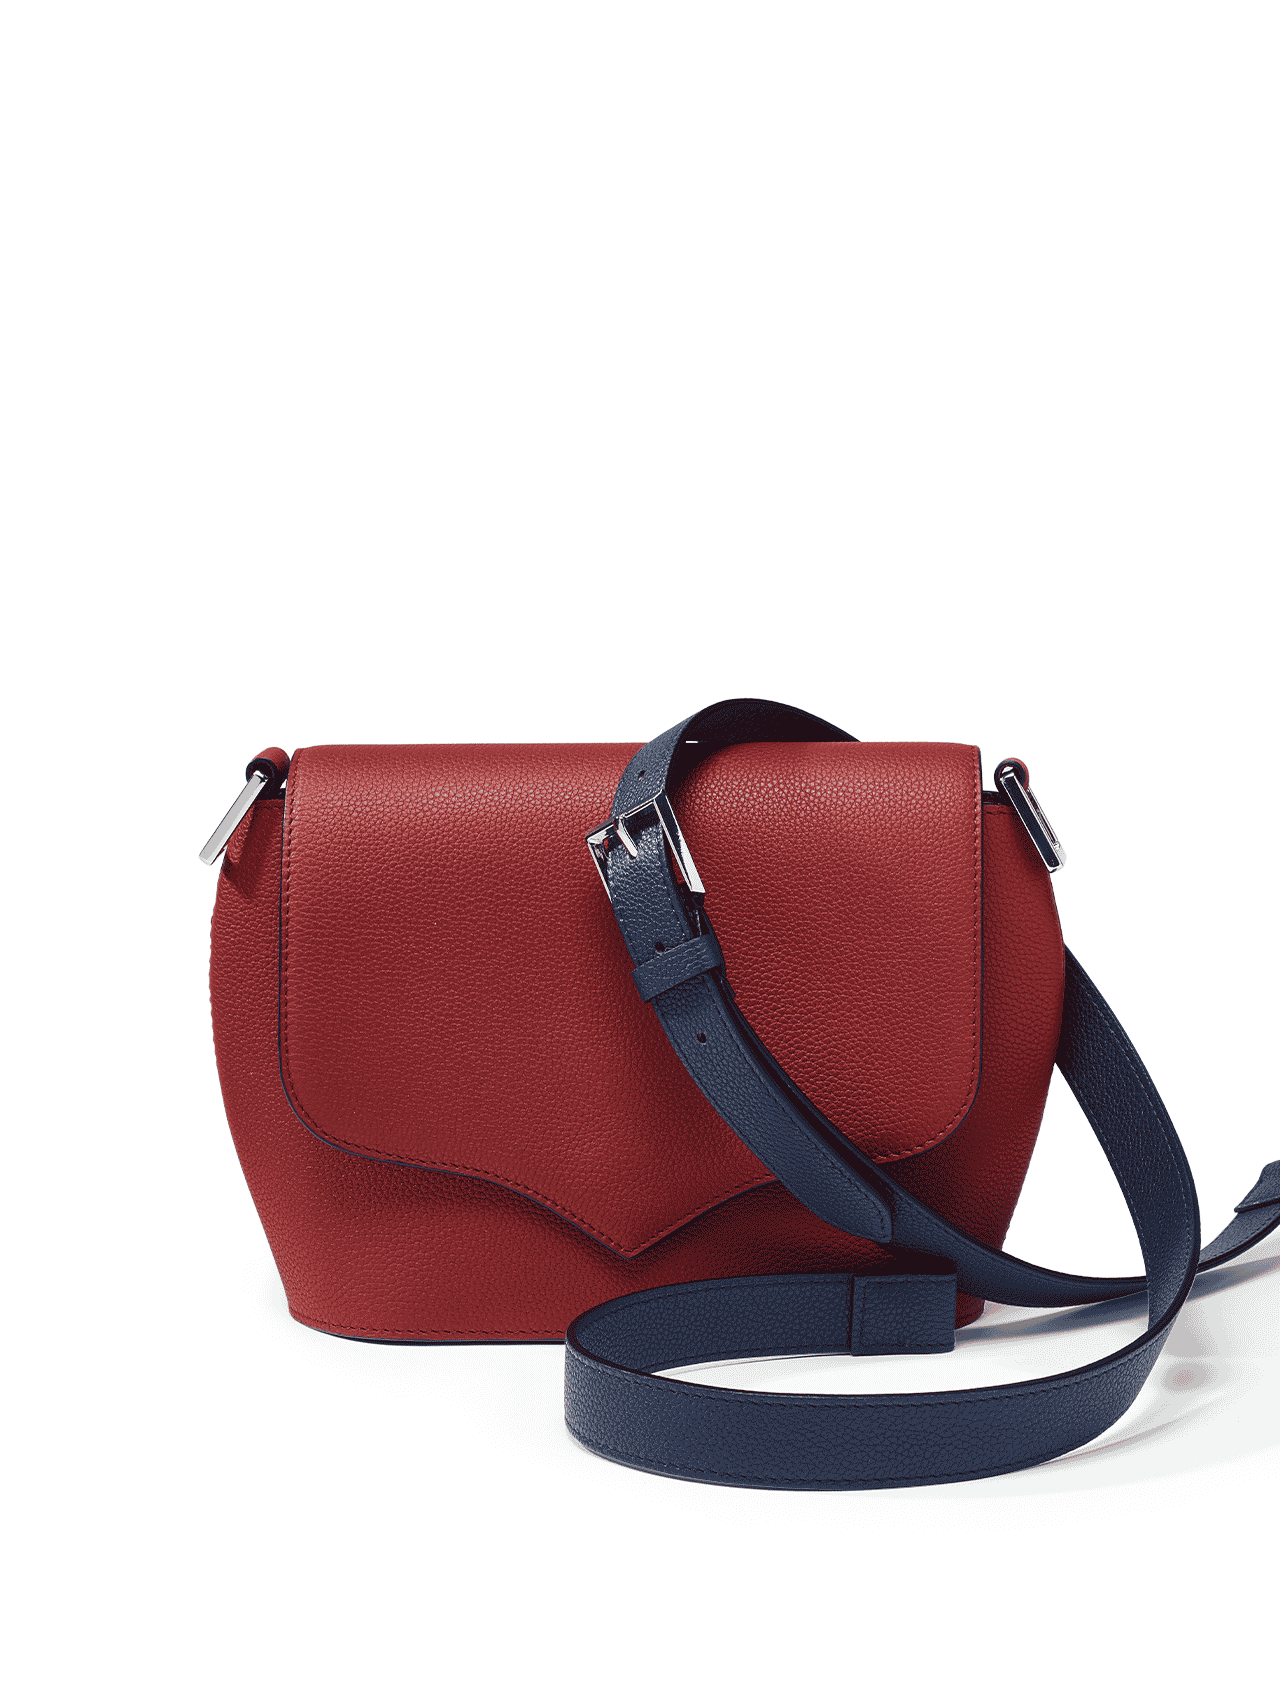 bag leather jean rousseau red blue